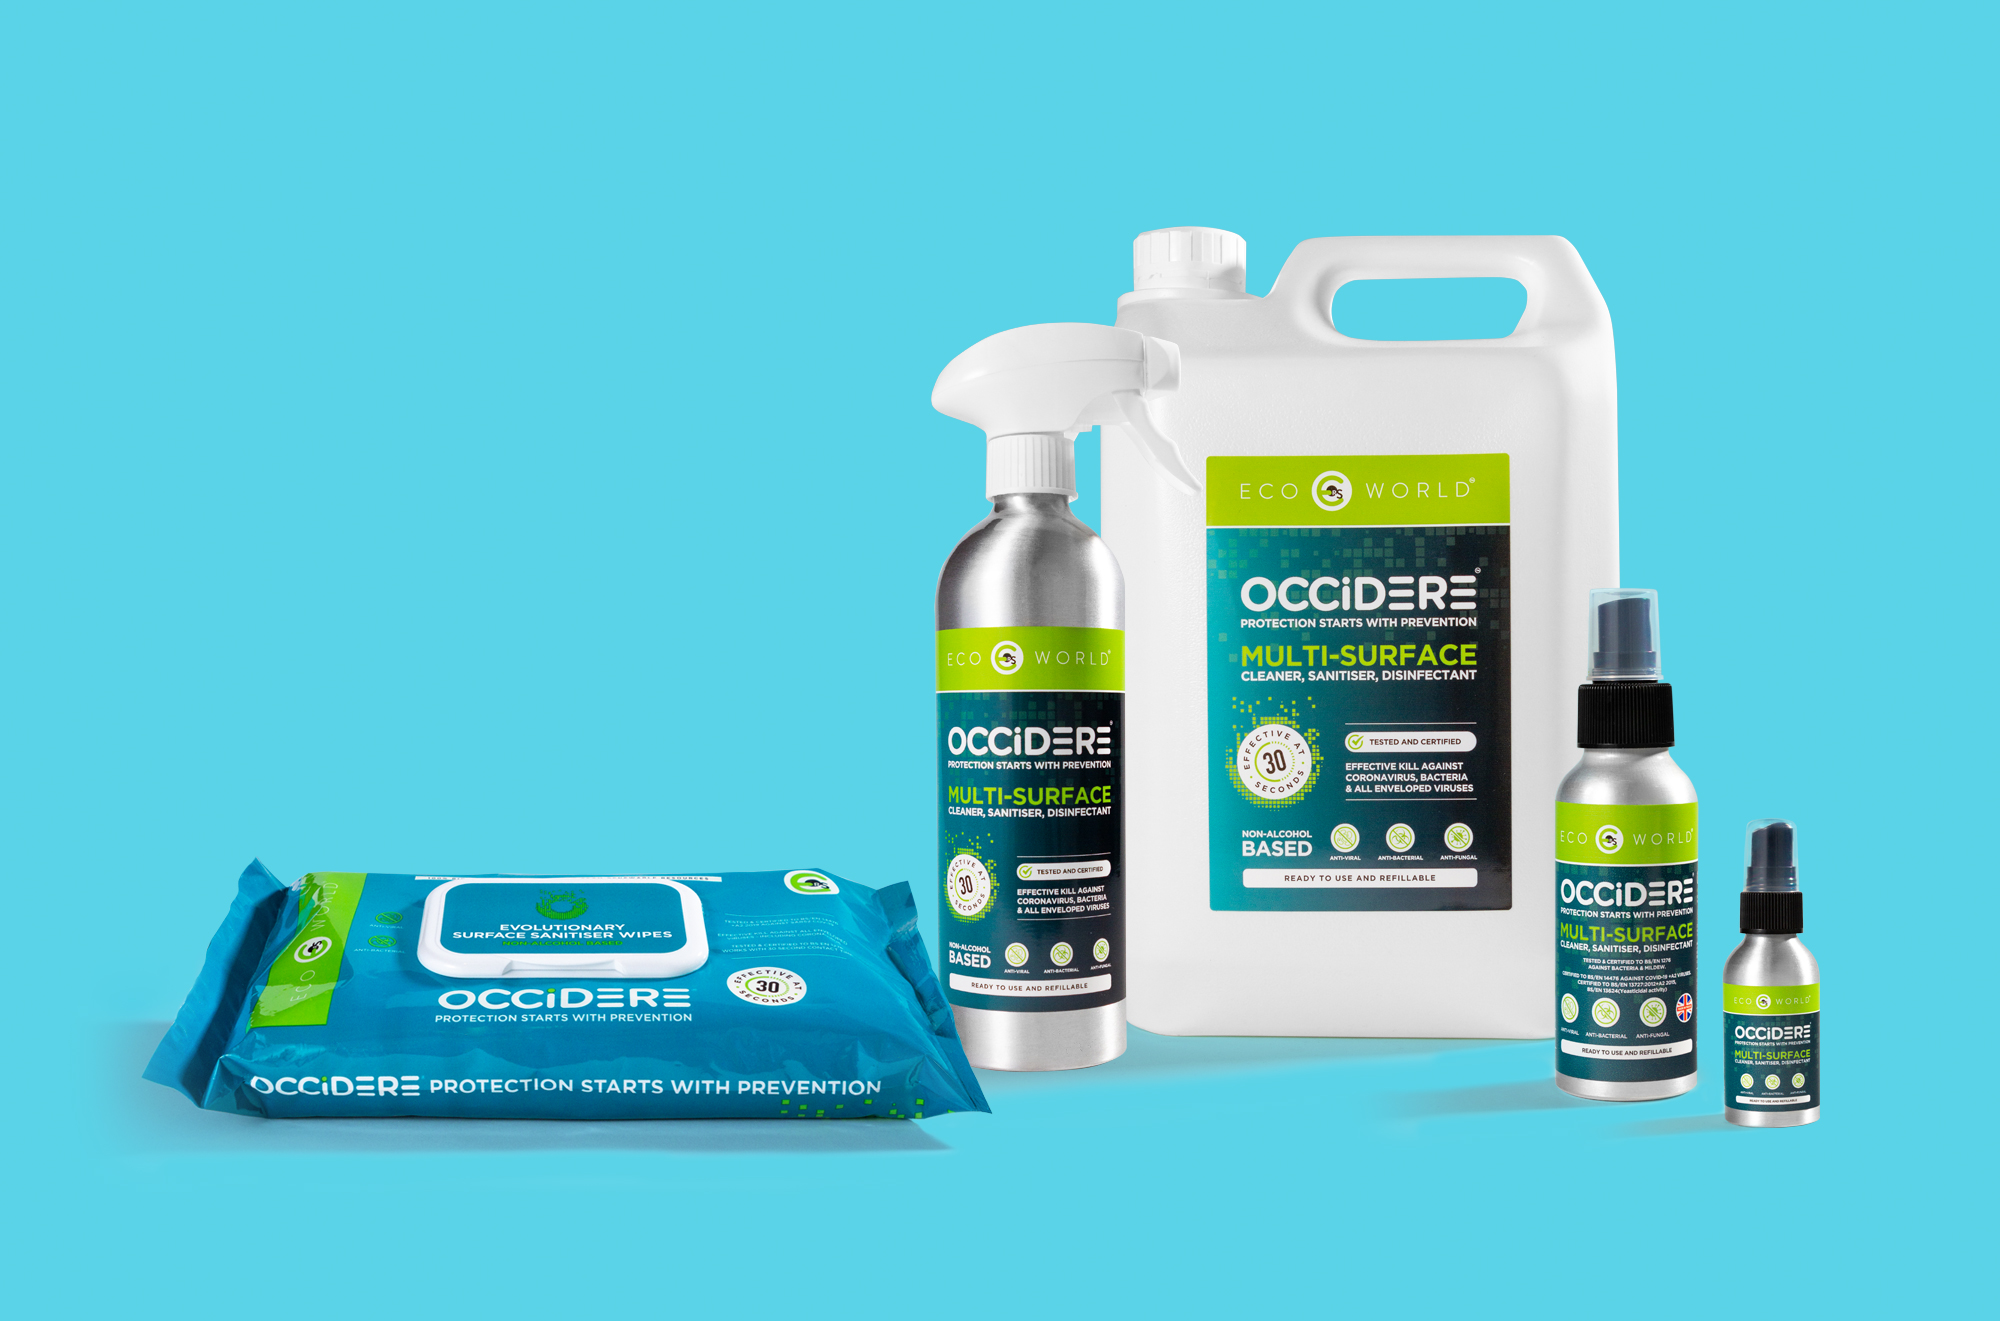 Occidere surface cleaning products